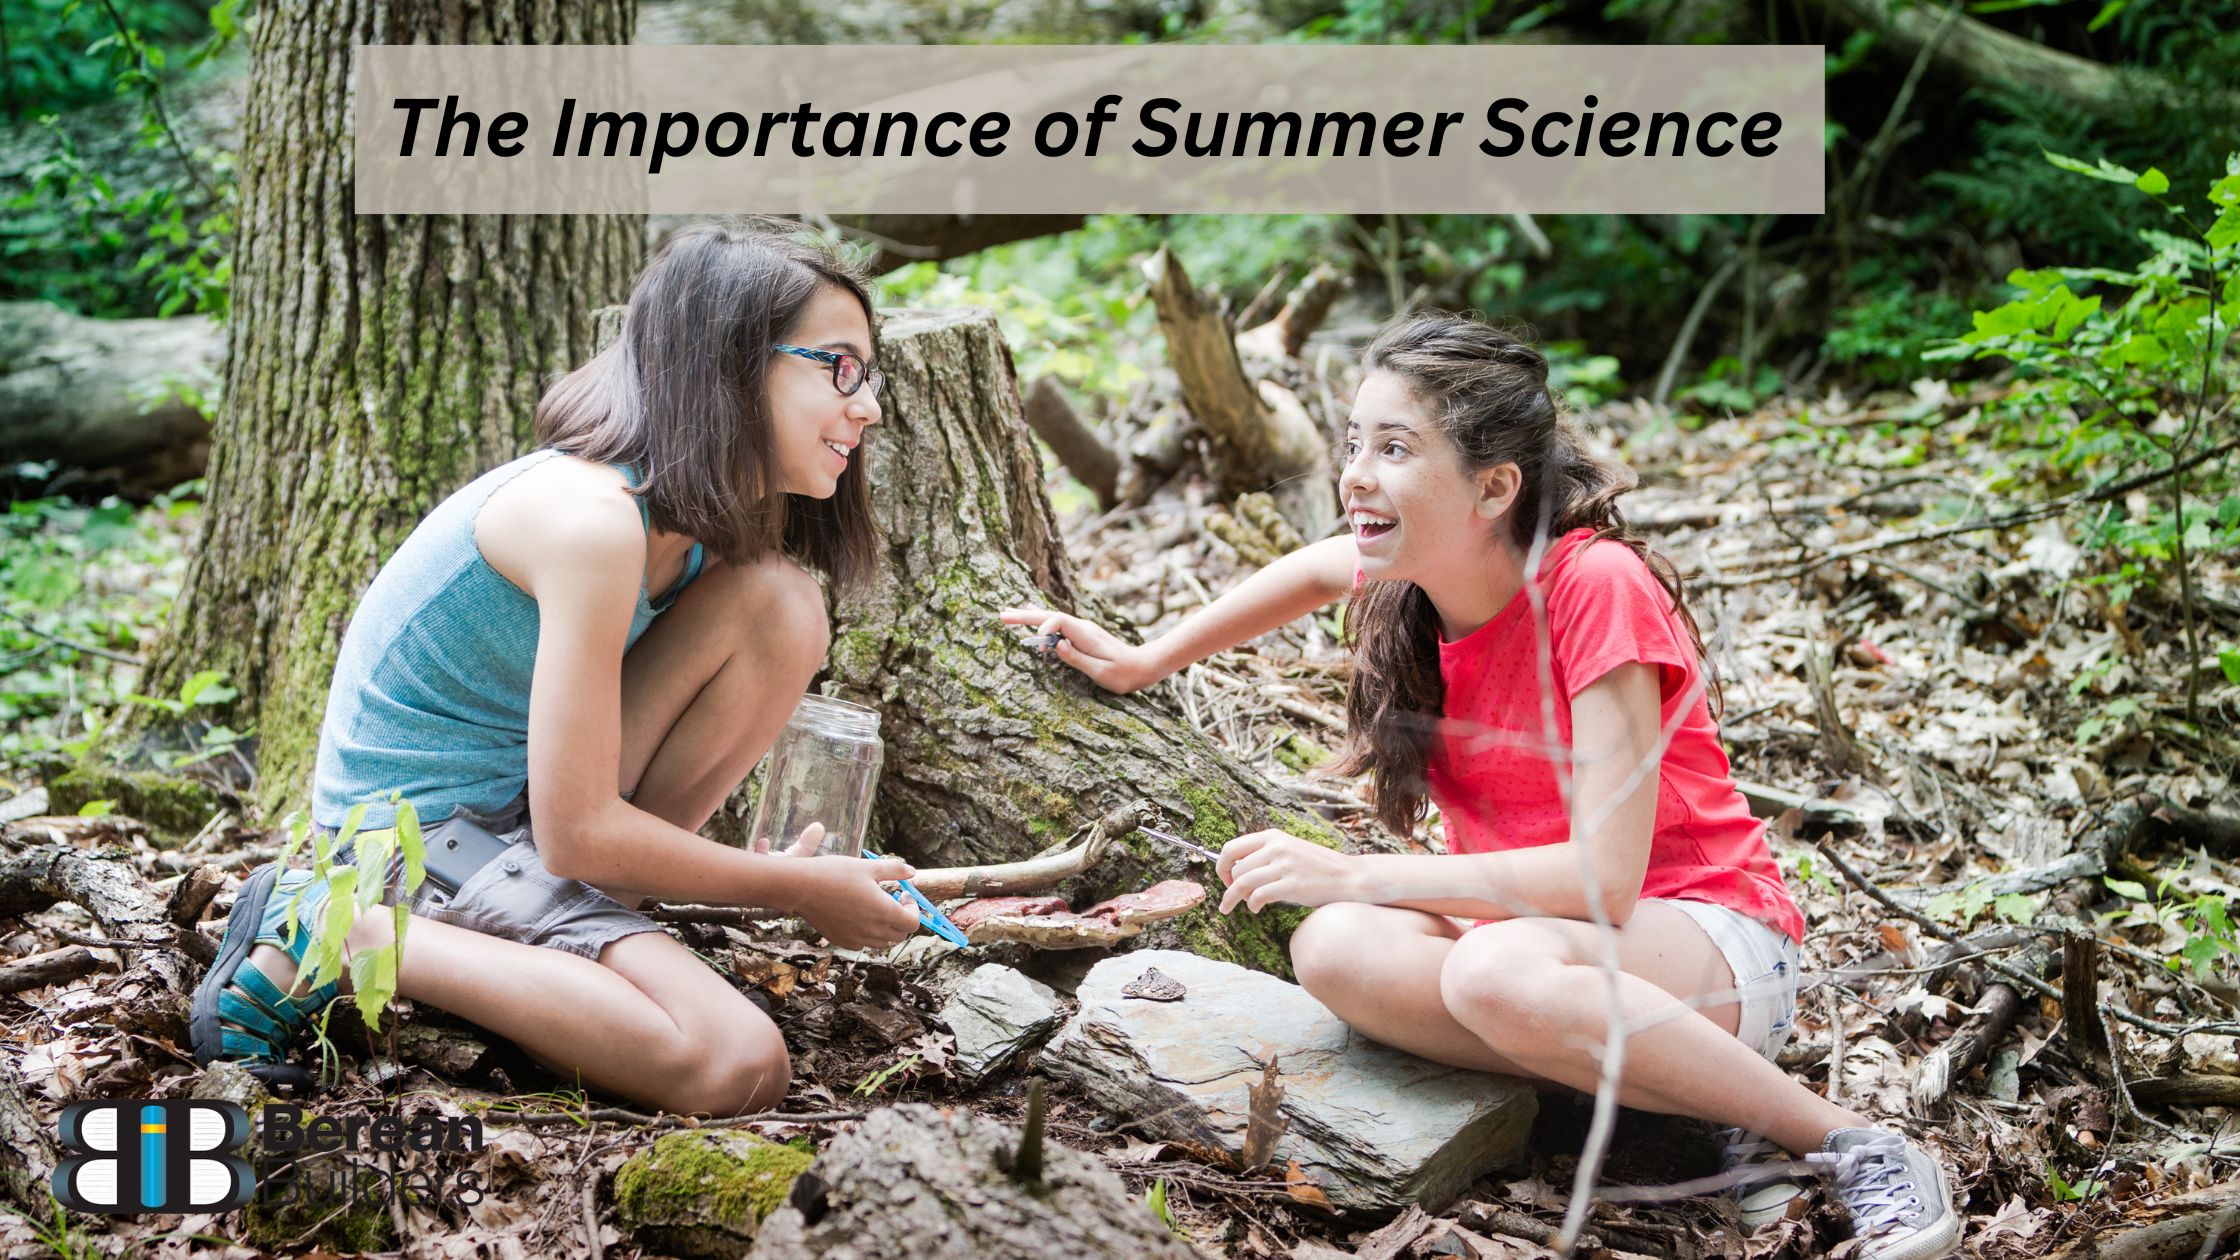 two girls enjoying summer science in a forest